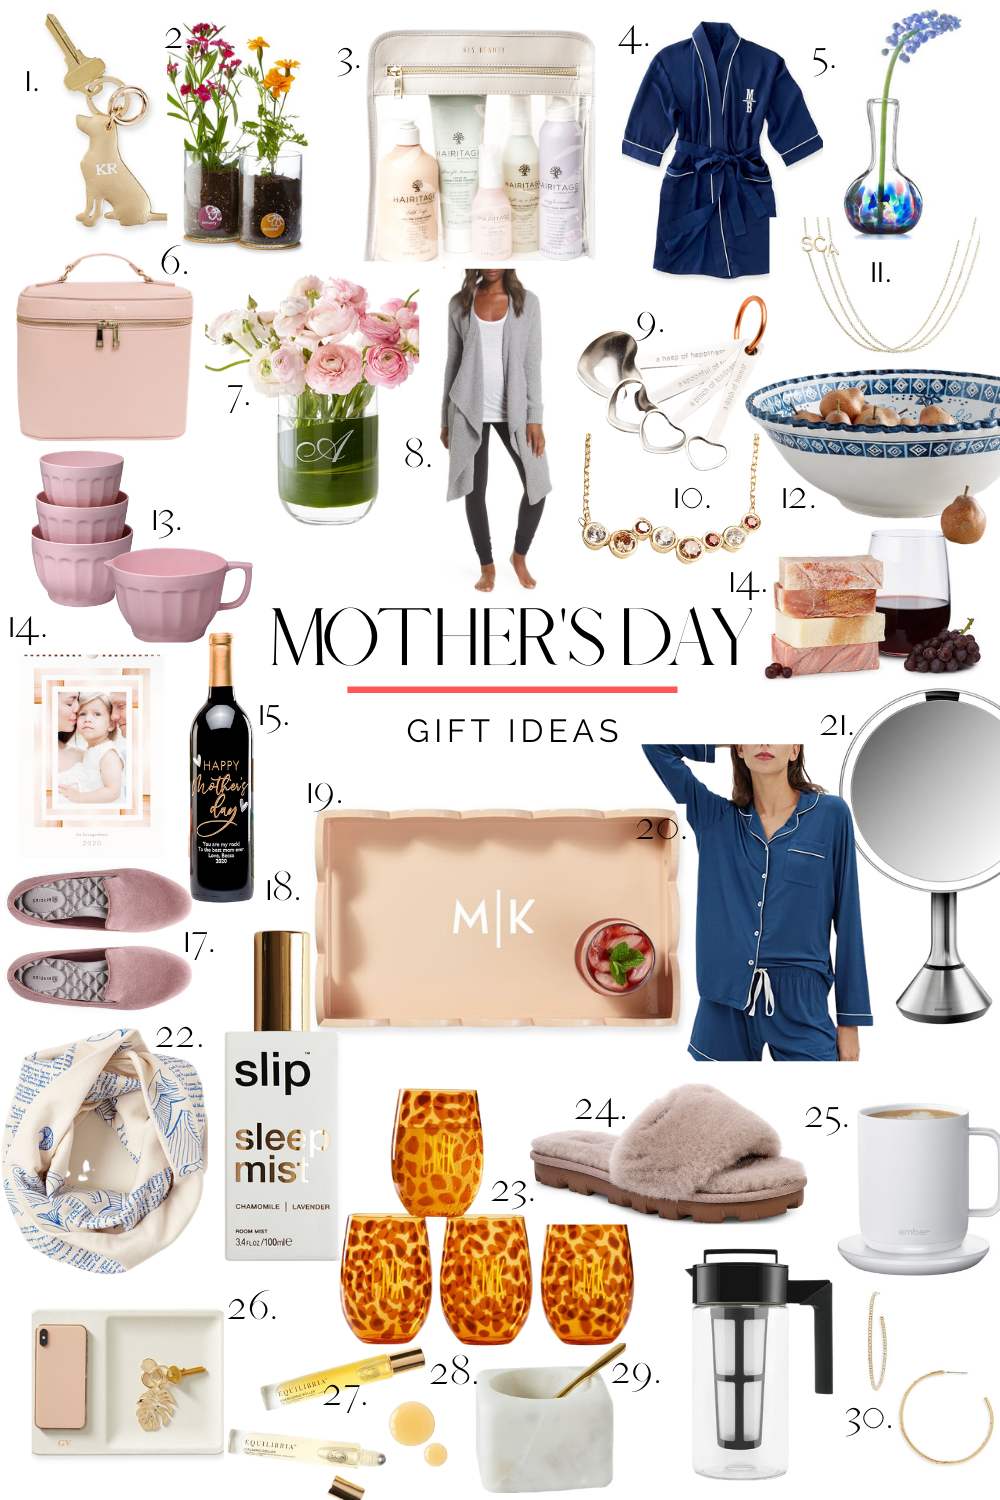 Holiday Gift Guide  For Mom + Mother-In-Law - My Kind of Sweet